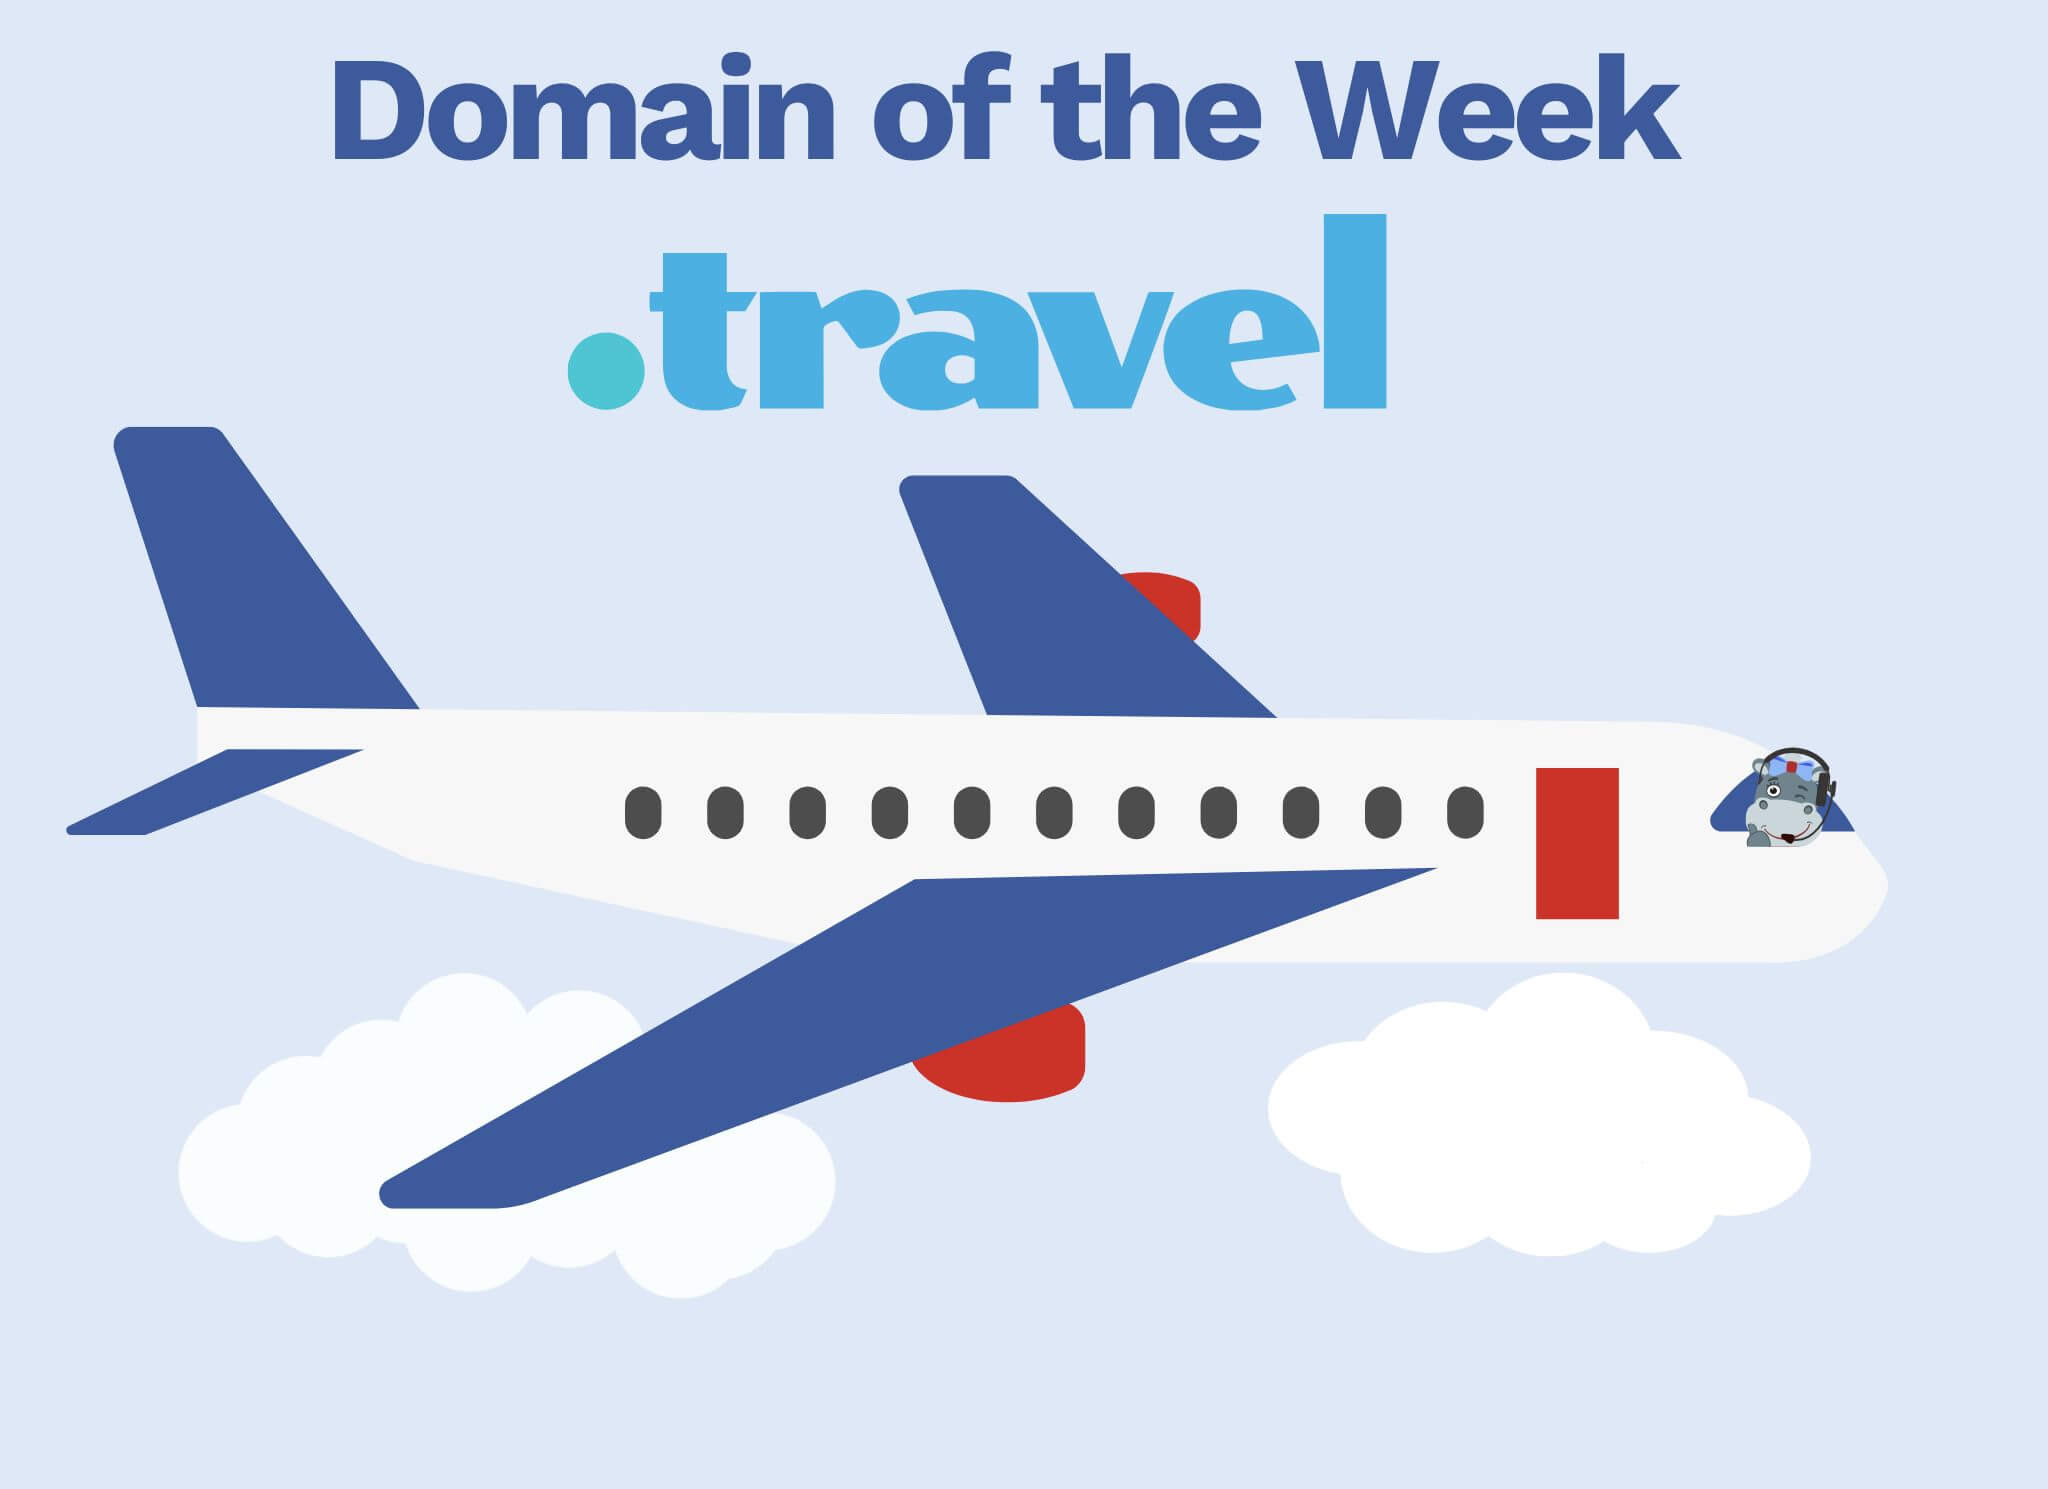 Domain of the Week - Grab a .travel domain from Hipposerve